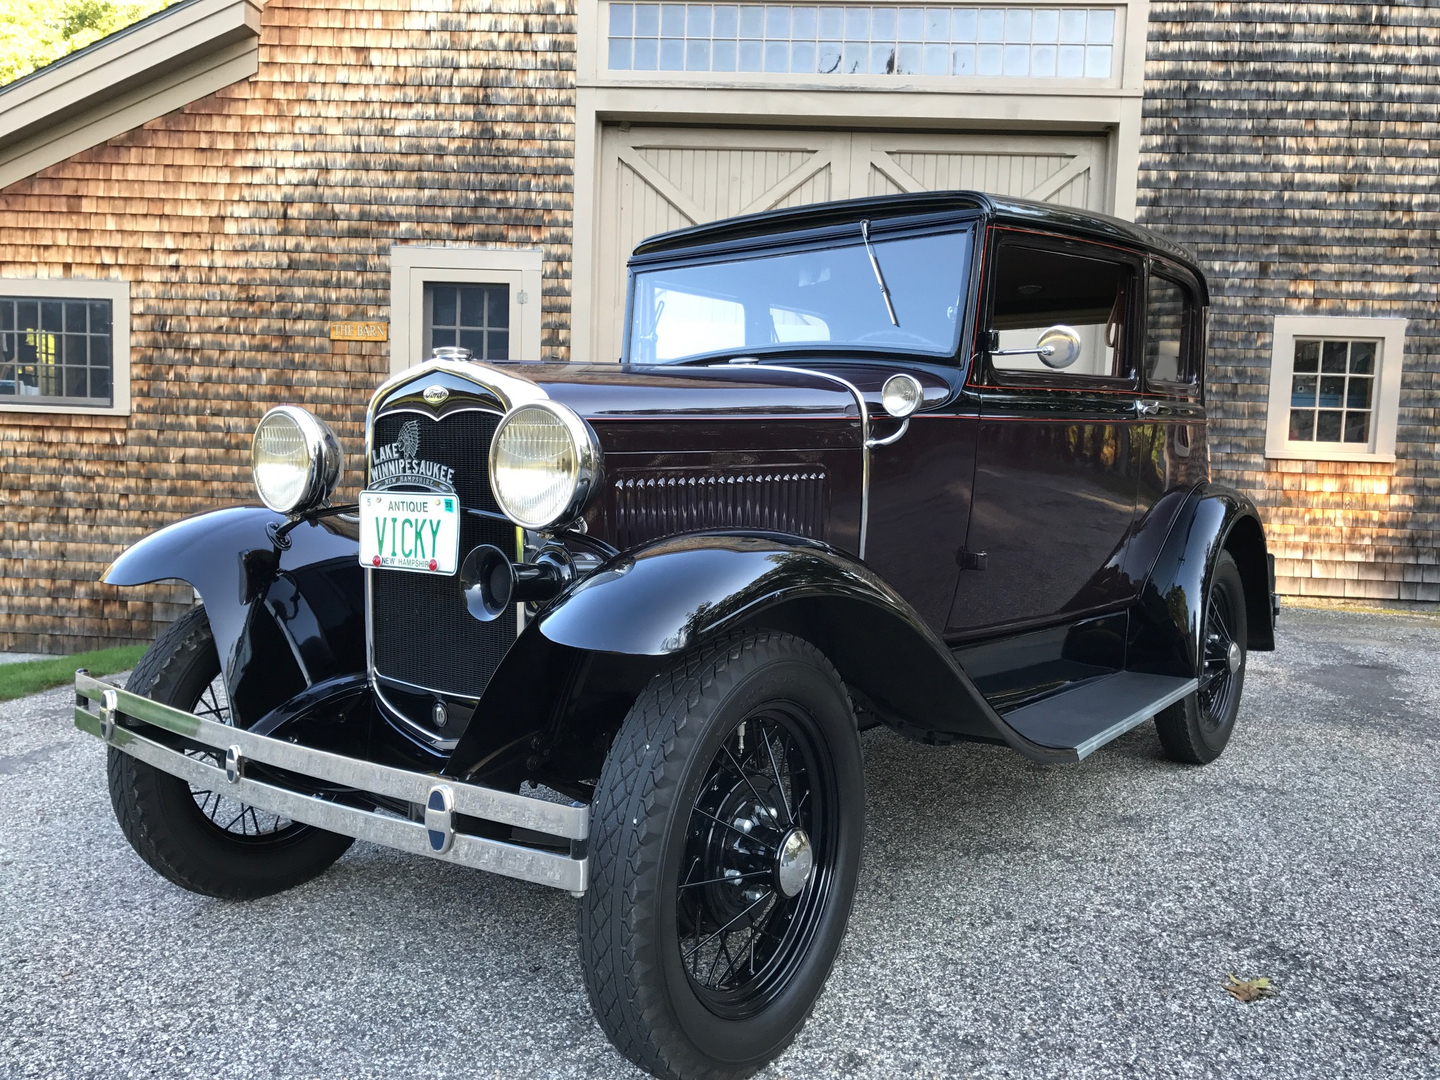 Antique Cars For Sale In Nh - Antique Poster